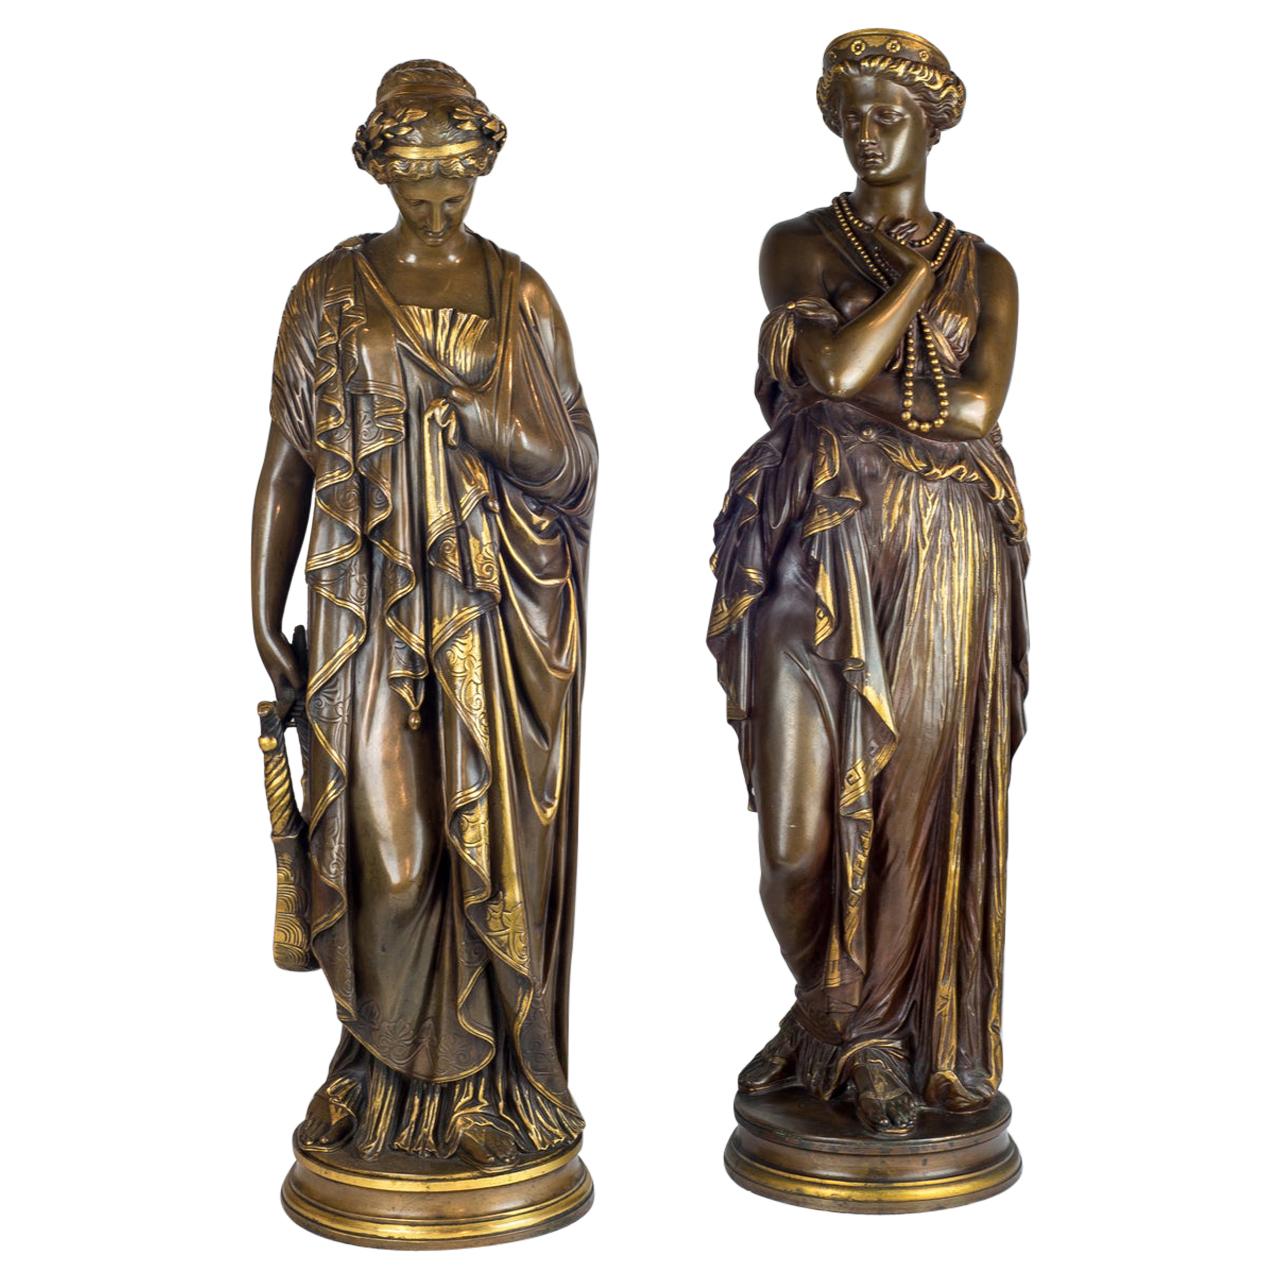 Fine Quality Pair of Patinated Bronze Statues by Jean-Baptiste Clésinger